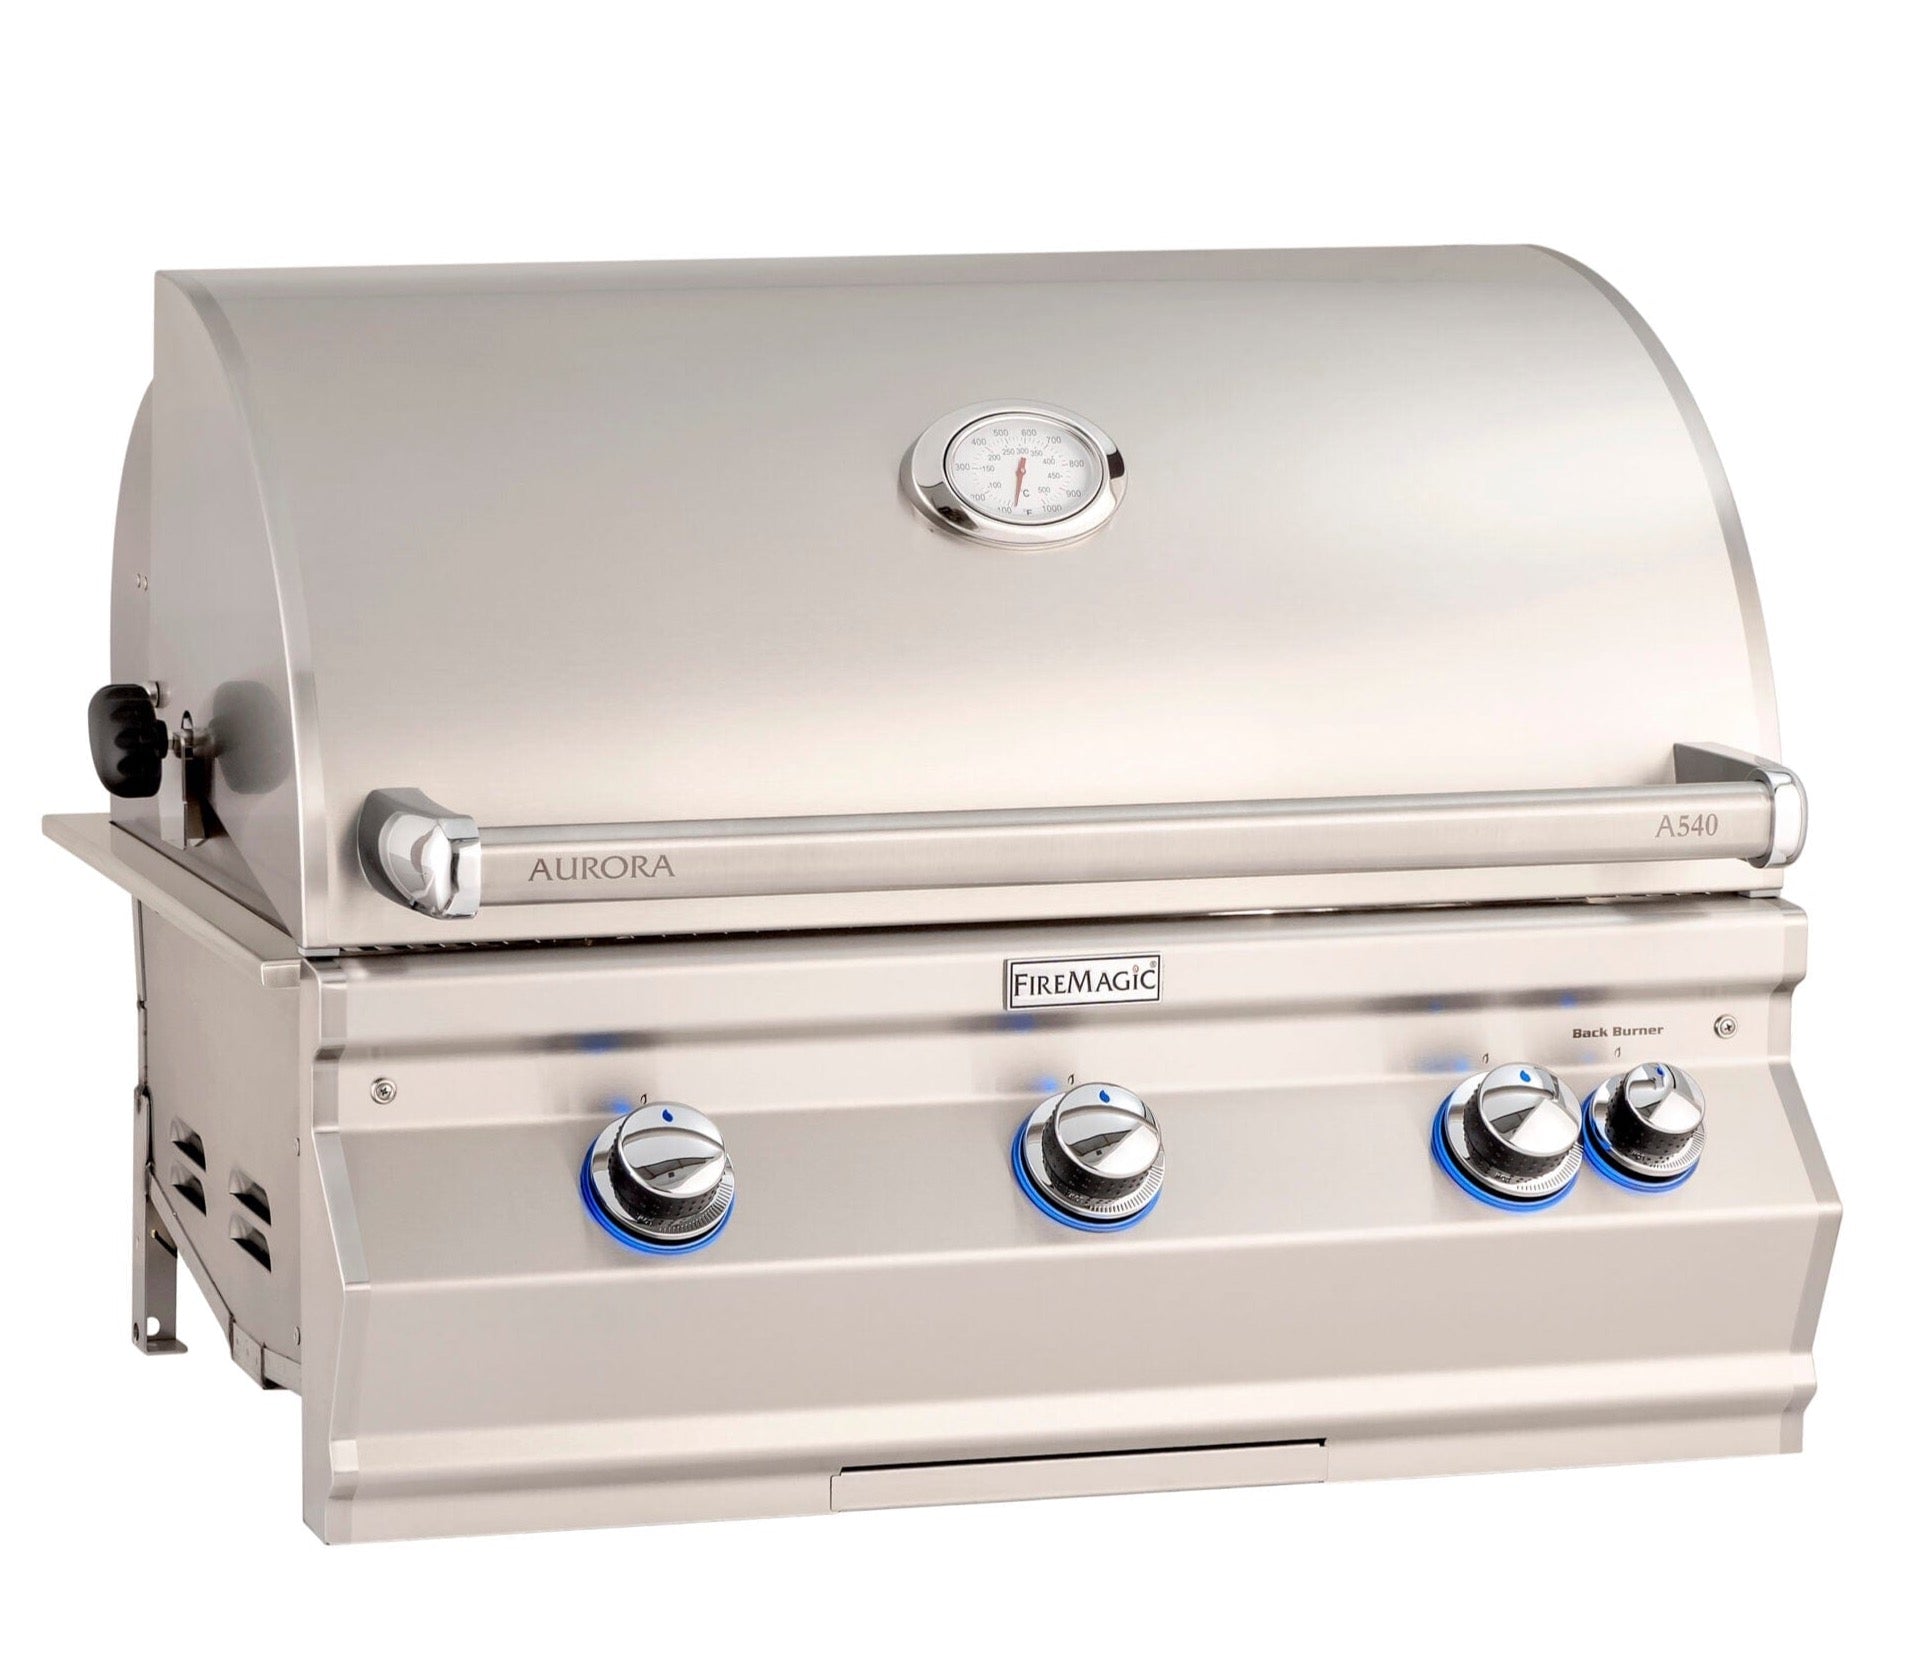 Firemagic Grills Fire Magic Aurora 30" Built-In Grill with Analog Thermometer / A540i